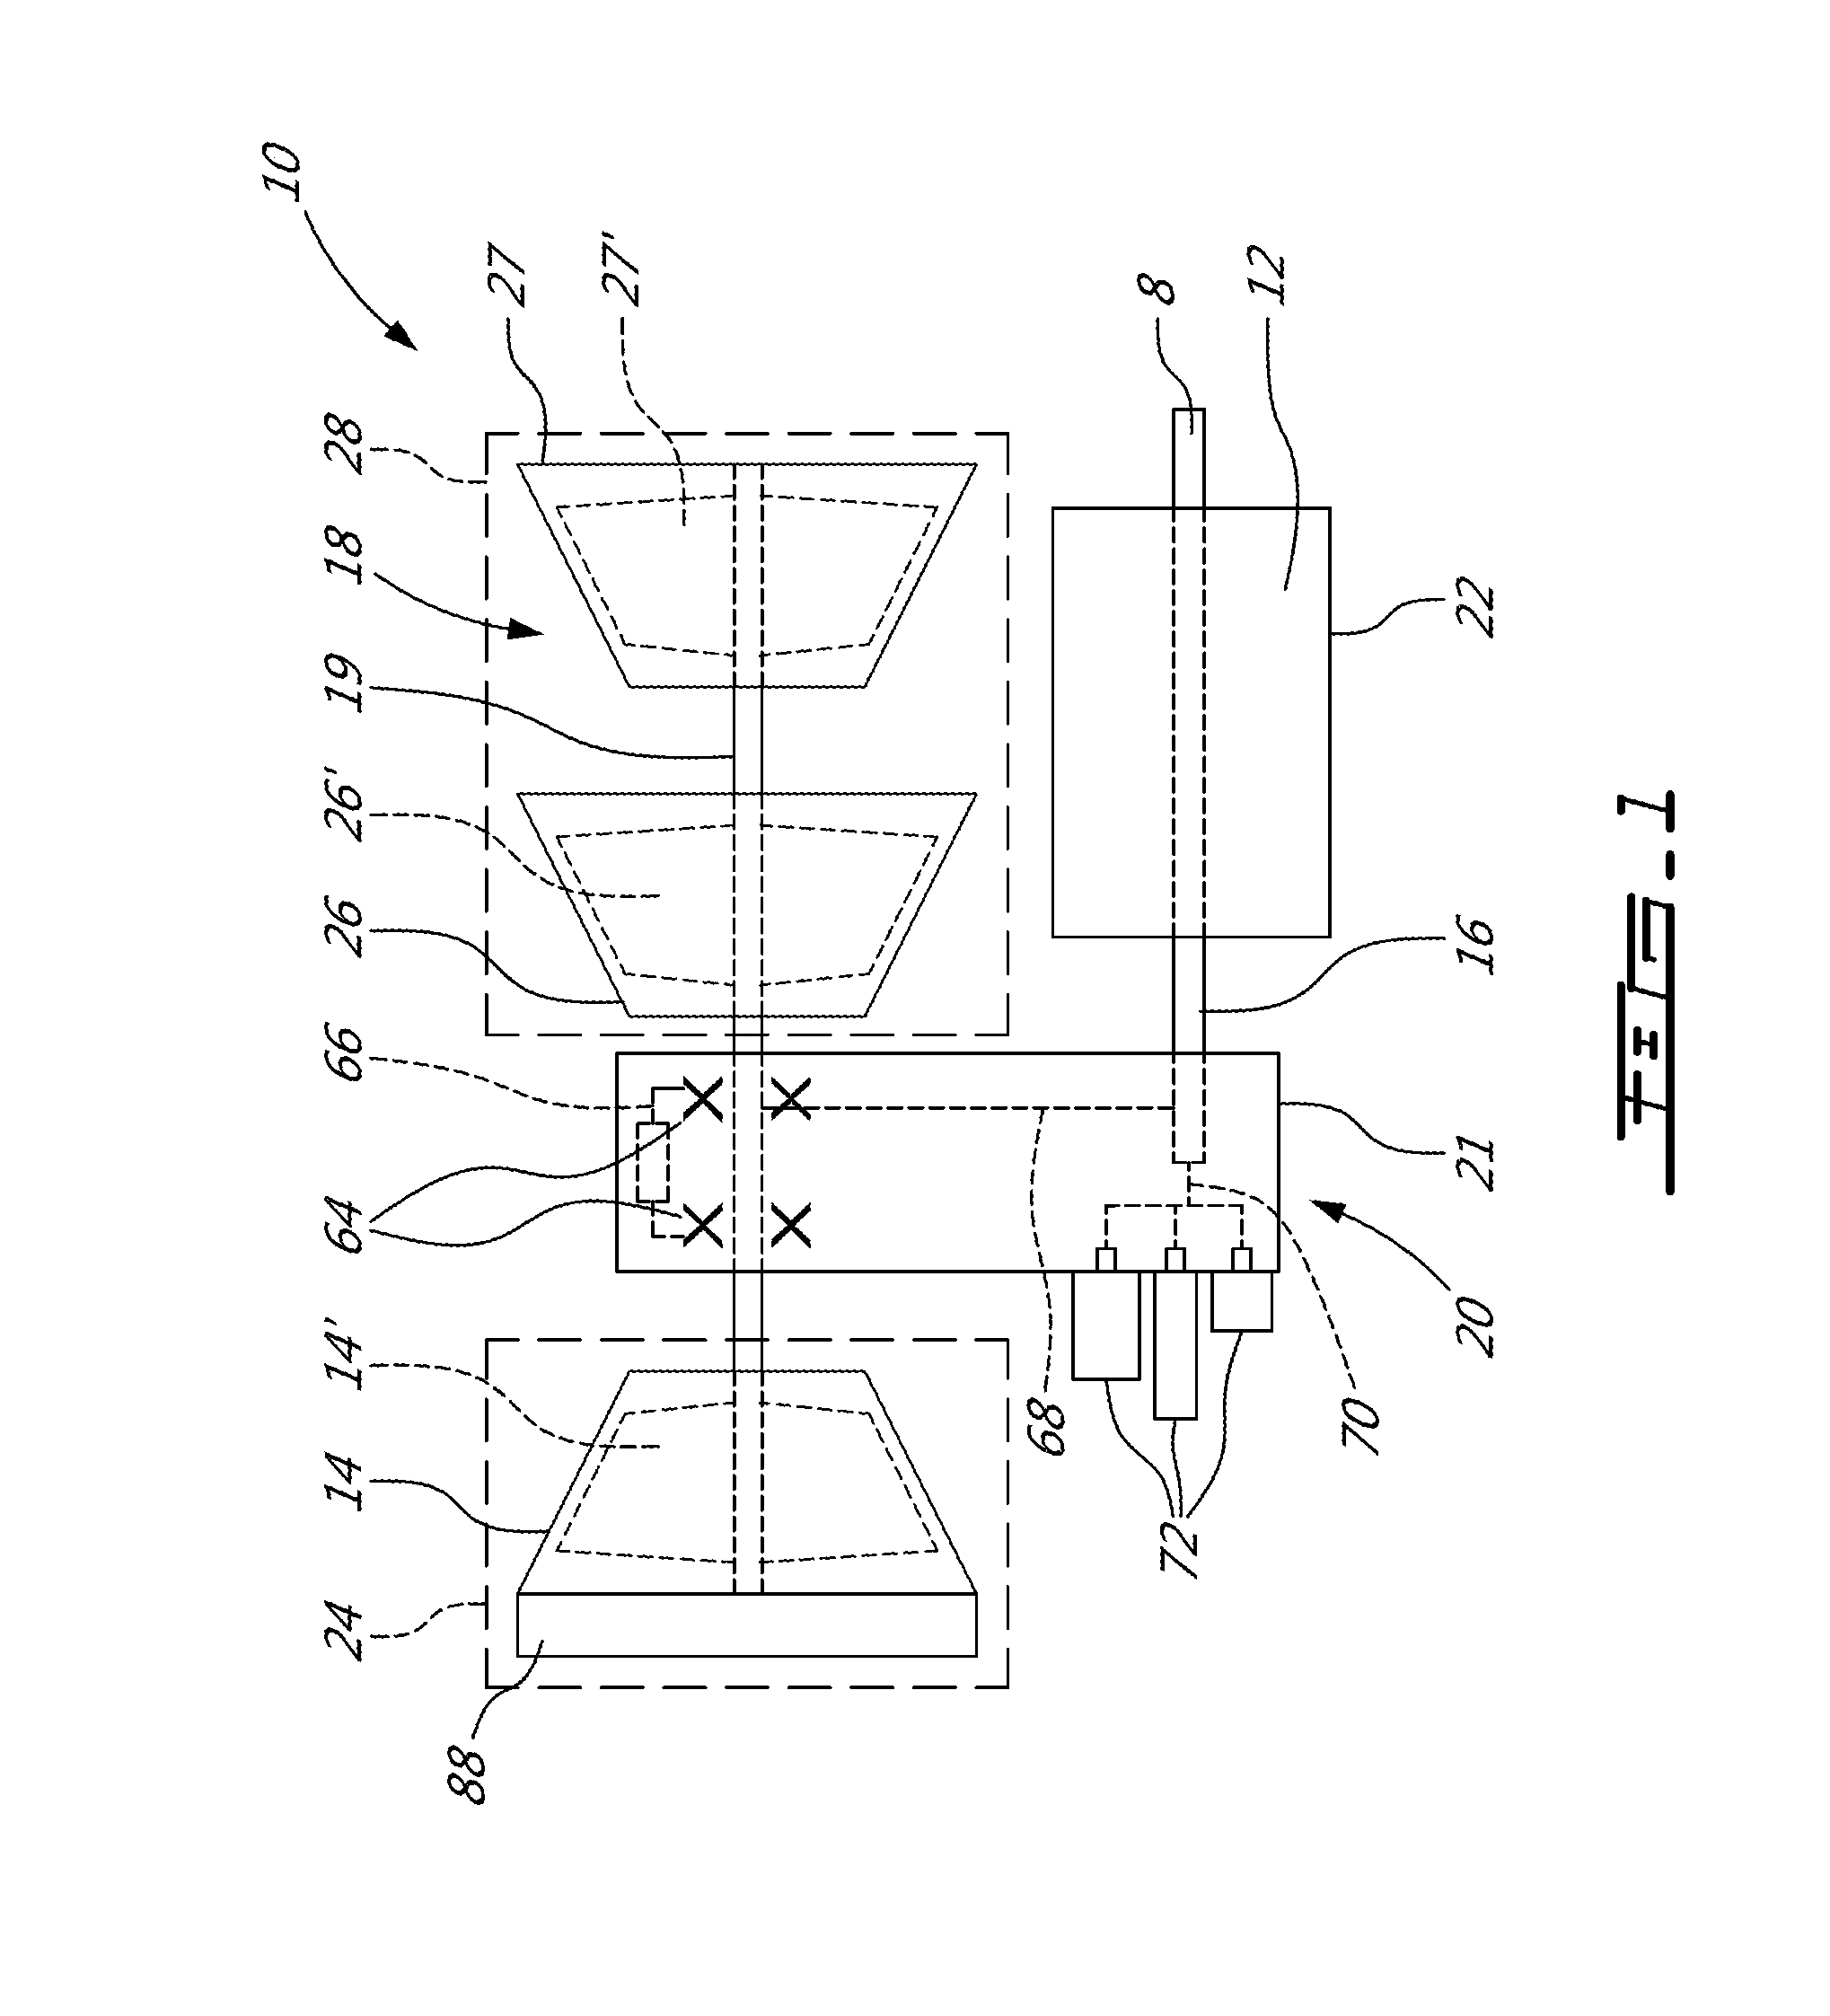 Compound engine assembly with offset turbine shaft, engine shaft and inlet duct